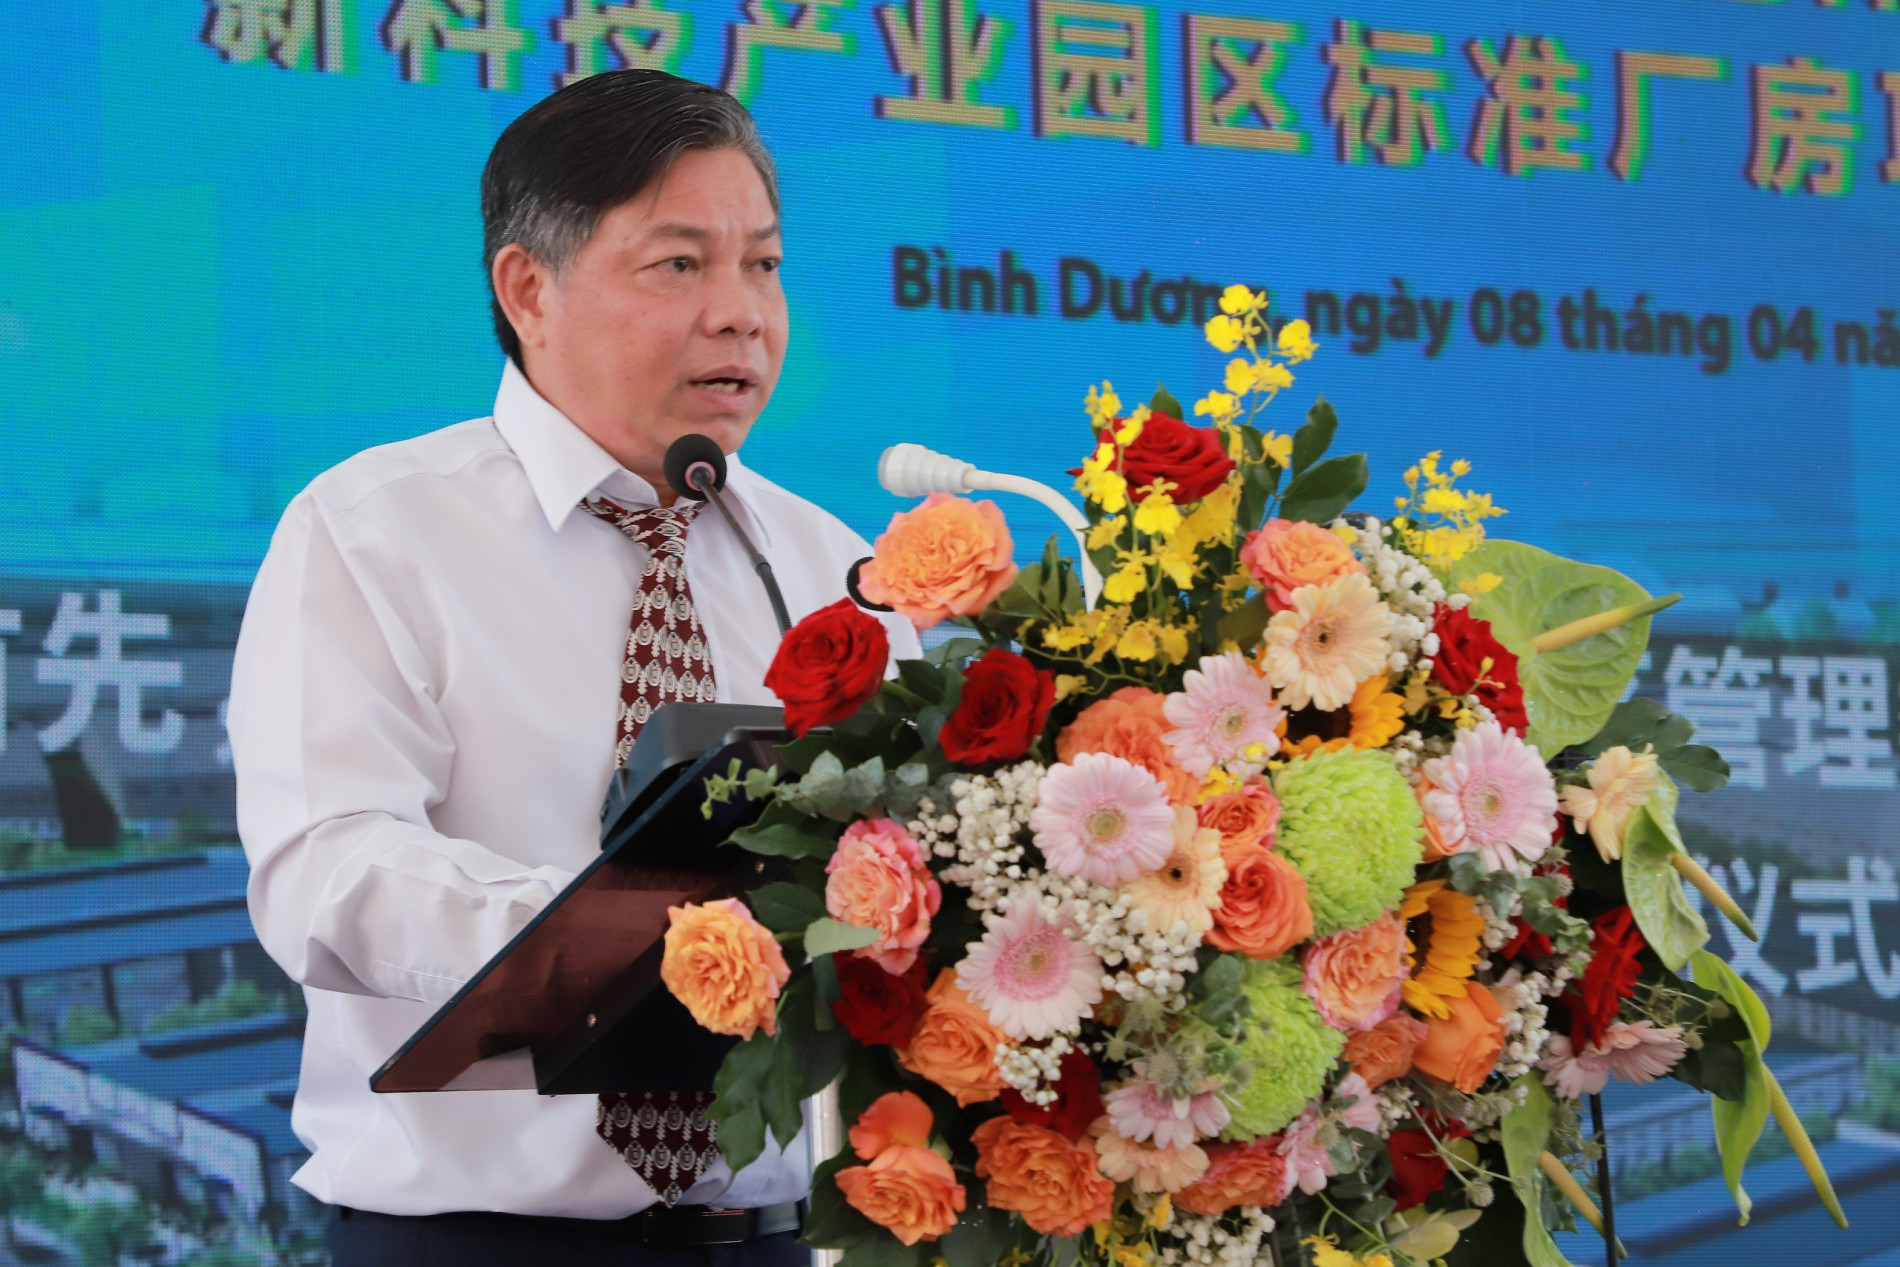 Viet Huong 2 Industrial Park started construction on a 100-factory production cluster worth 100 million USD